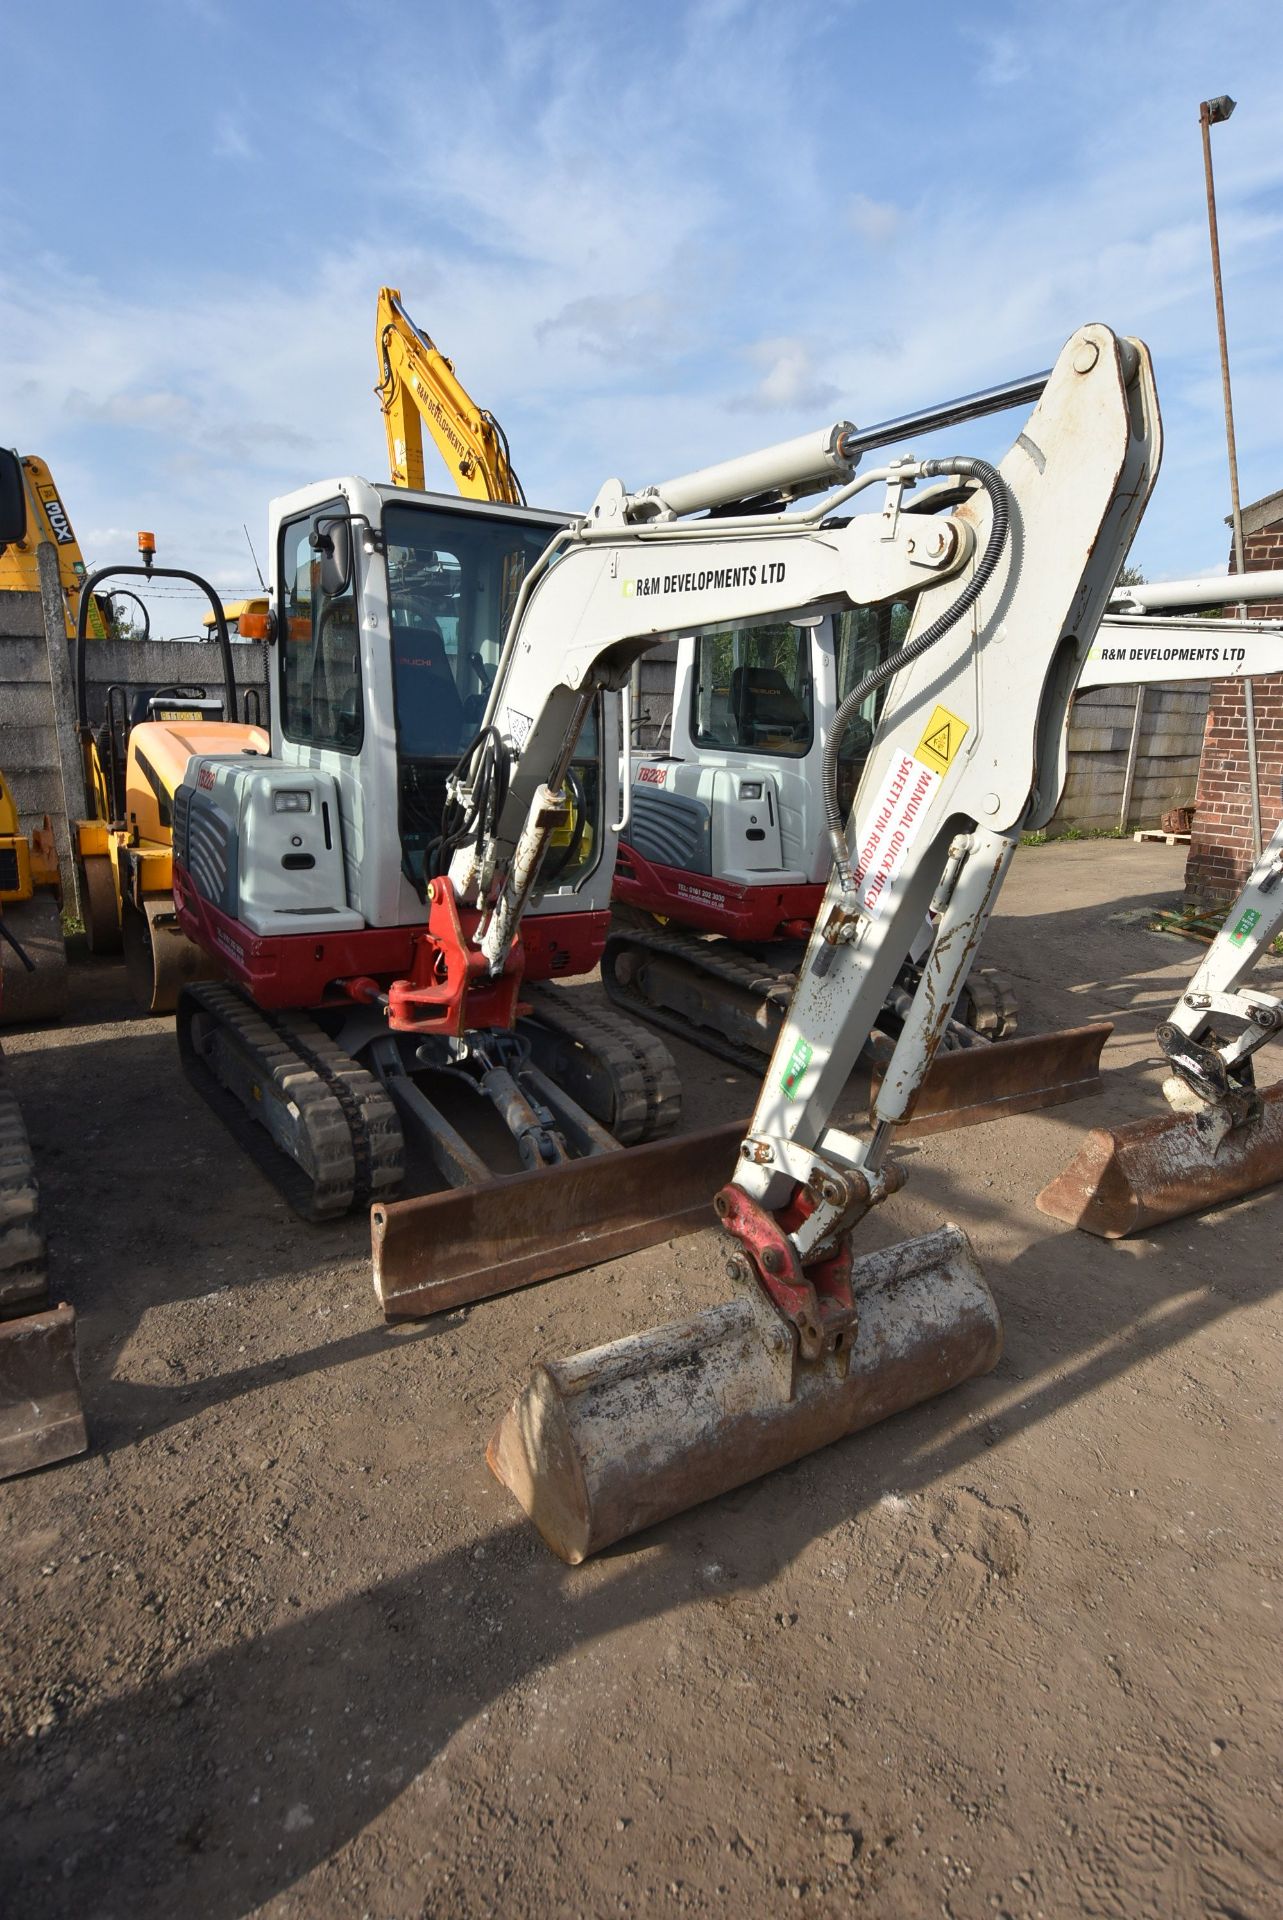 Takeuchi TB228 3T TRACKED EXCAVATOR, serial no. 122803241, year of manufacture 2014, 17.8kW engine - Image 2 of 8